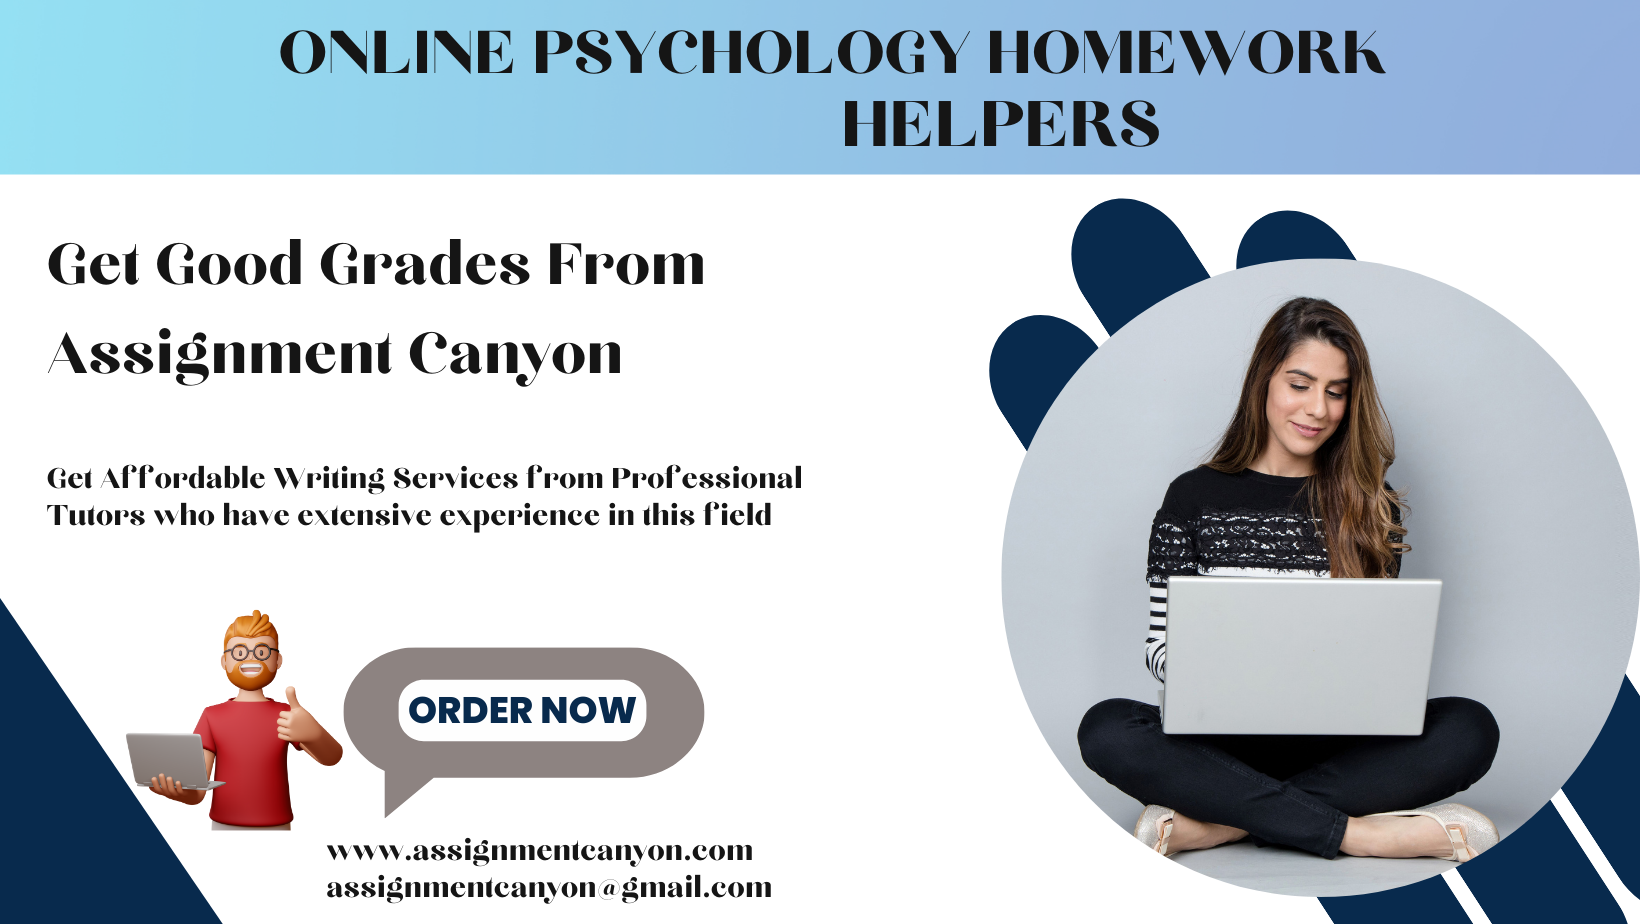 You can get online psychology assignment writing services from a click of a button - At Assignment Canyon